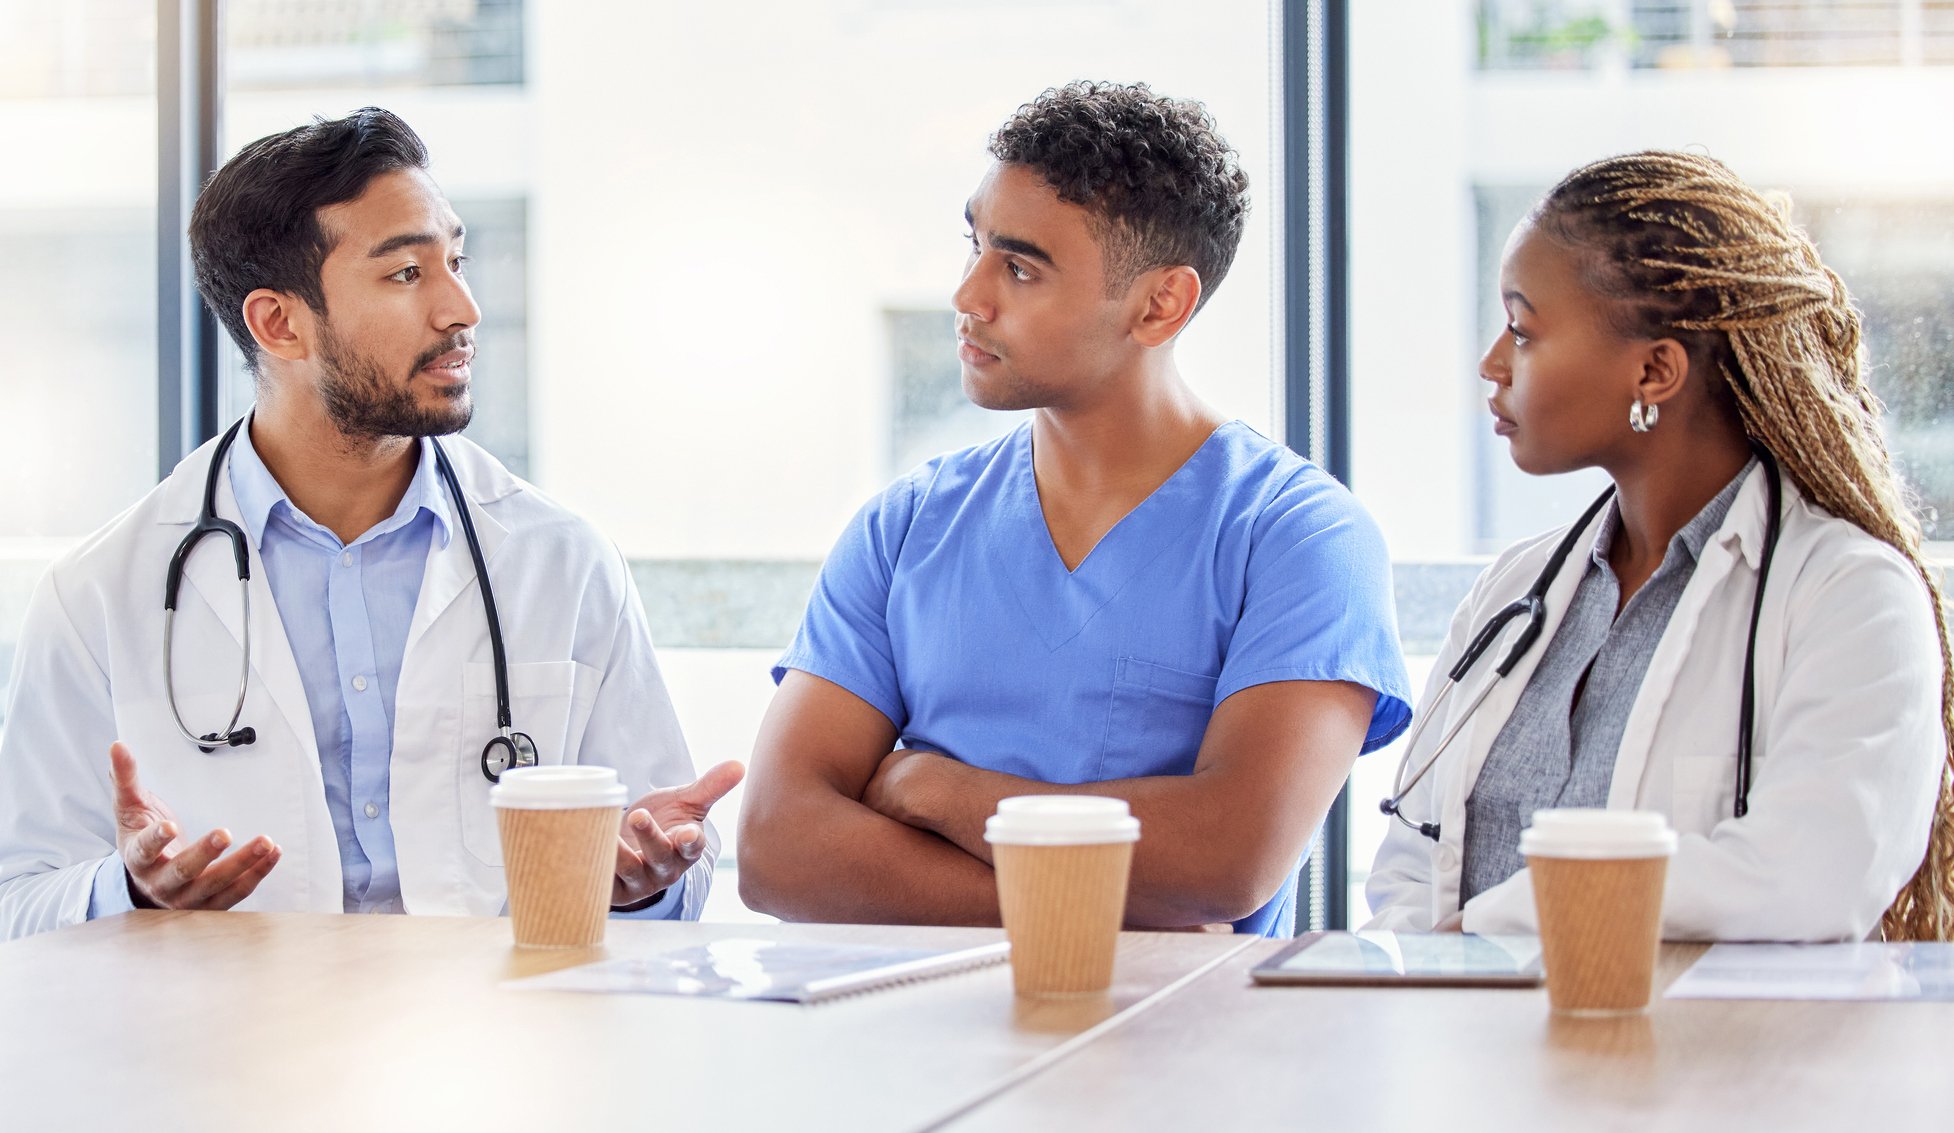 Employee Referral Programs: A Must For Healthcare Hiring